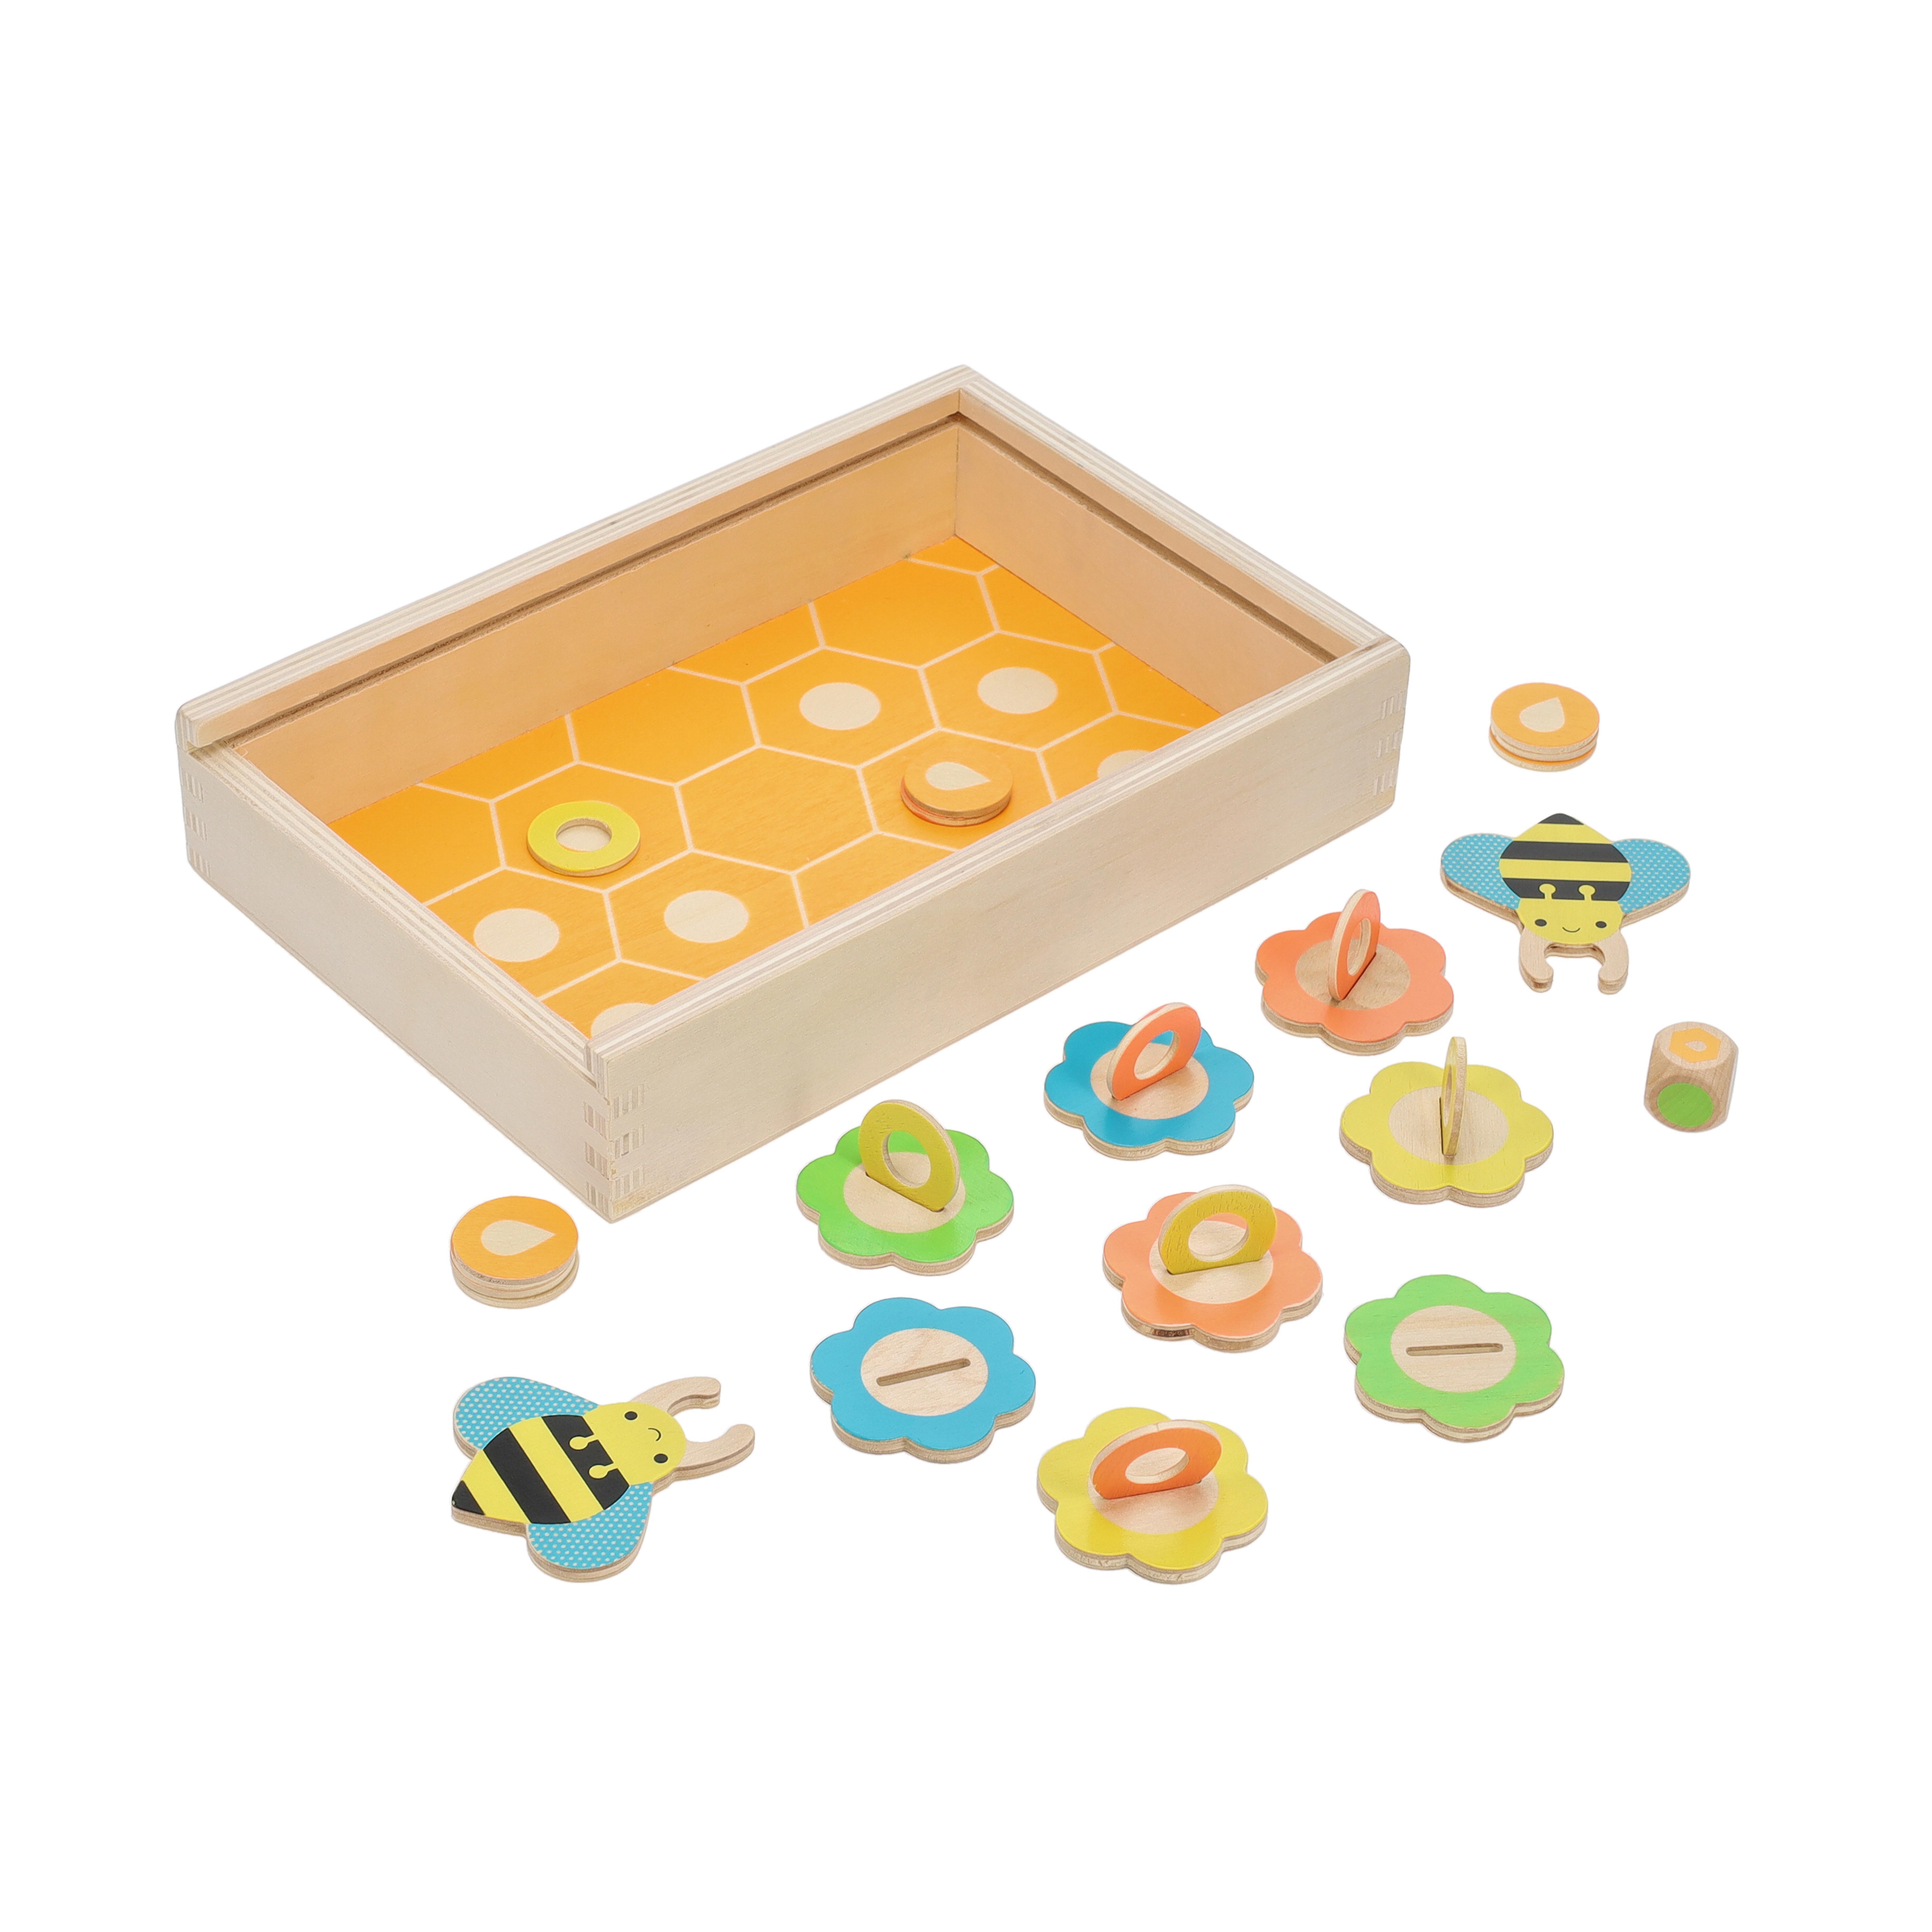 Save the Bees Wooden Game